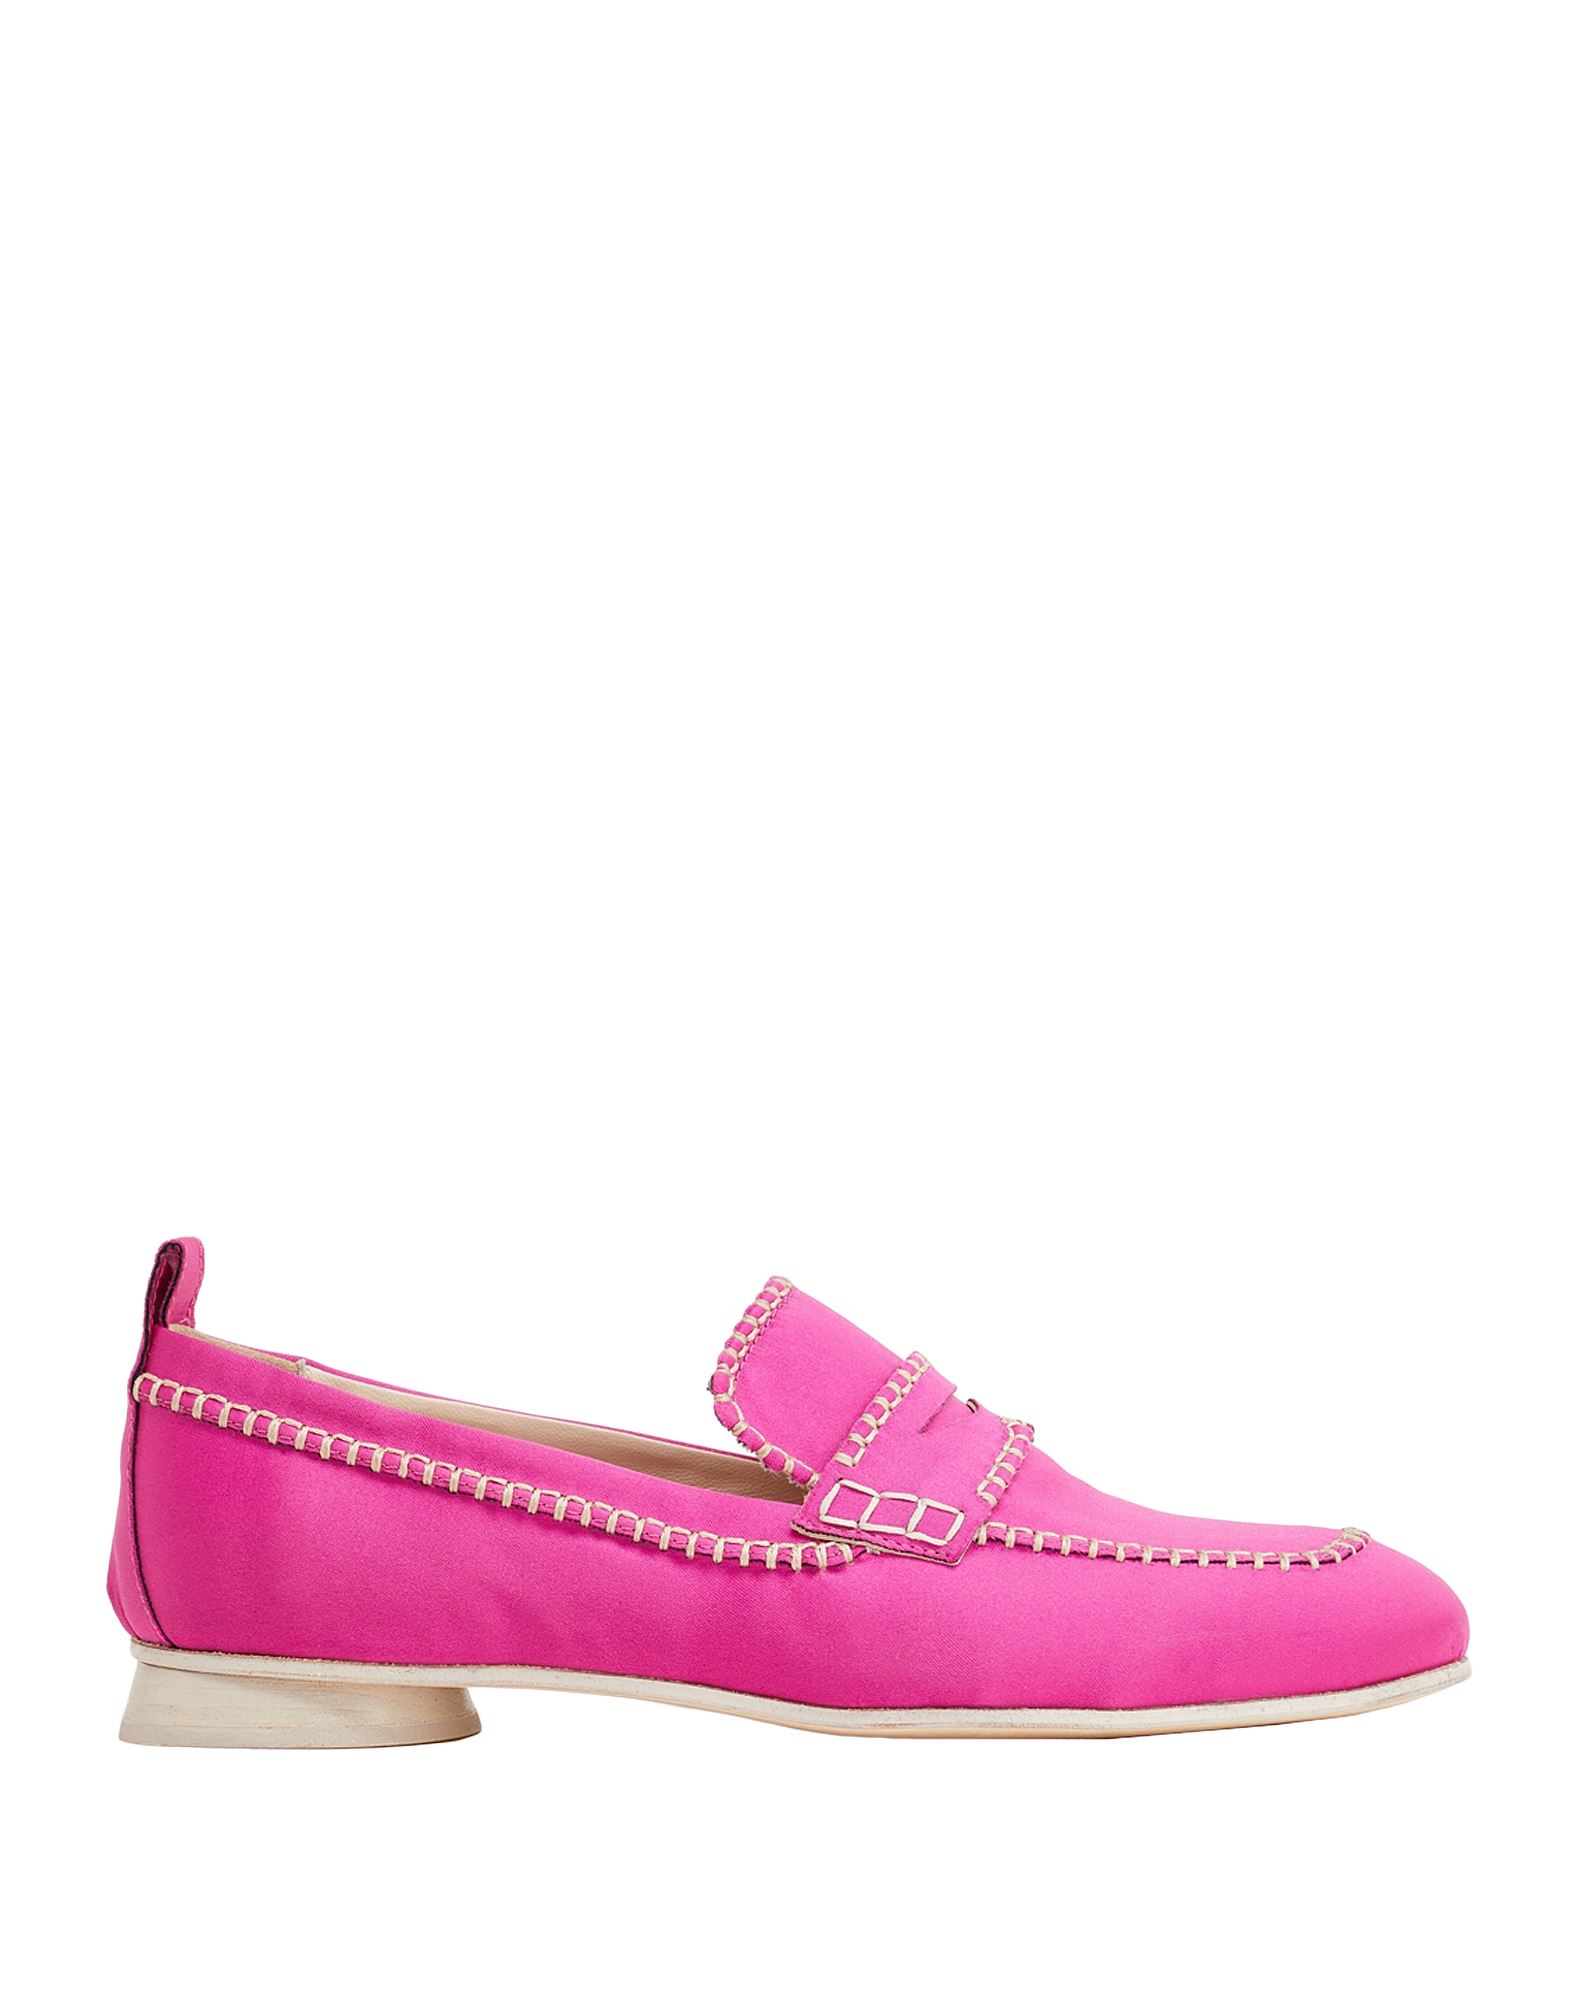 8 By Yoox Loafers In Magenta